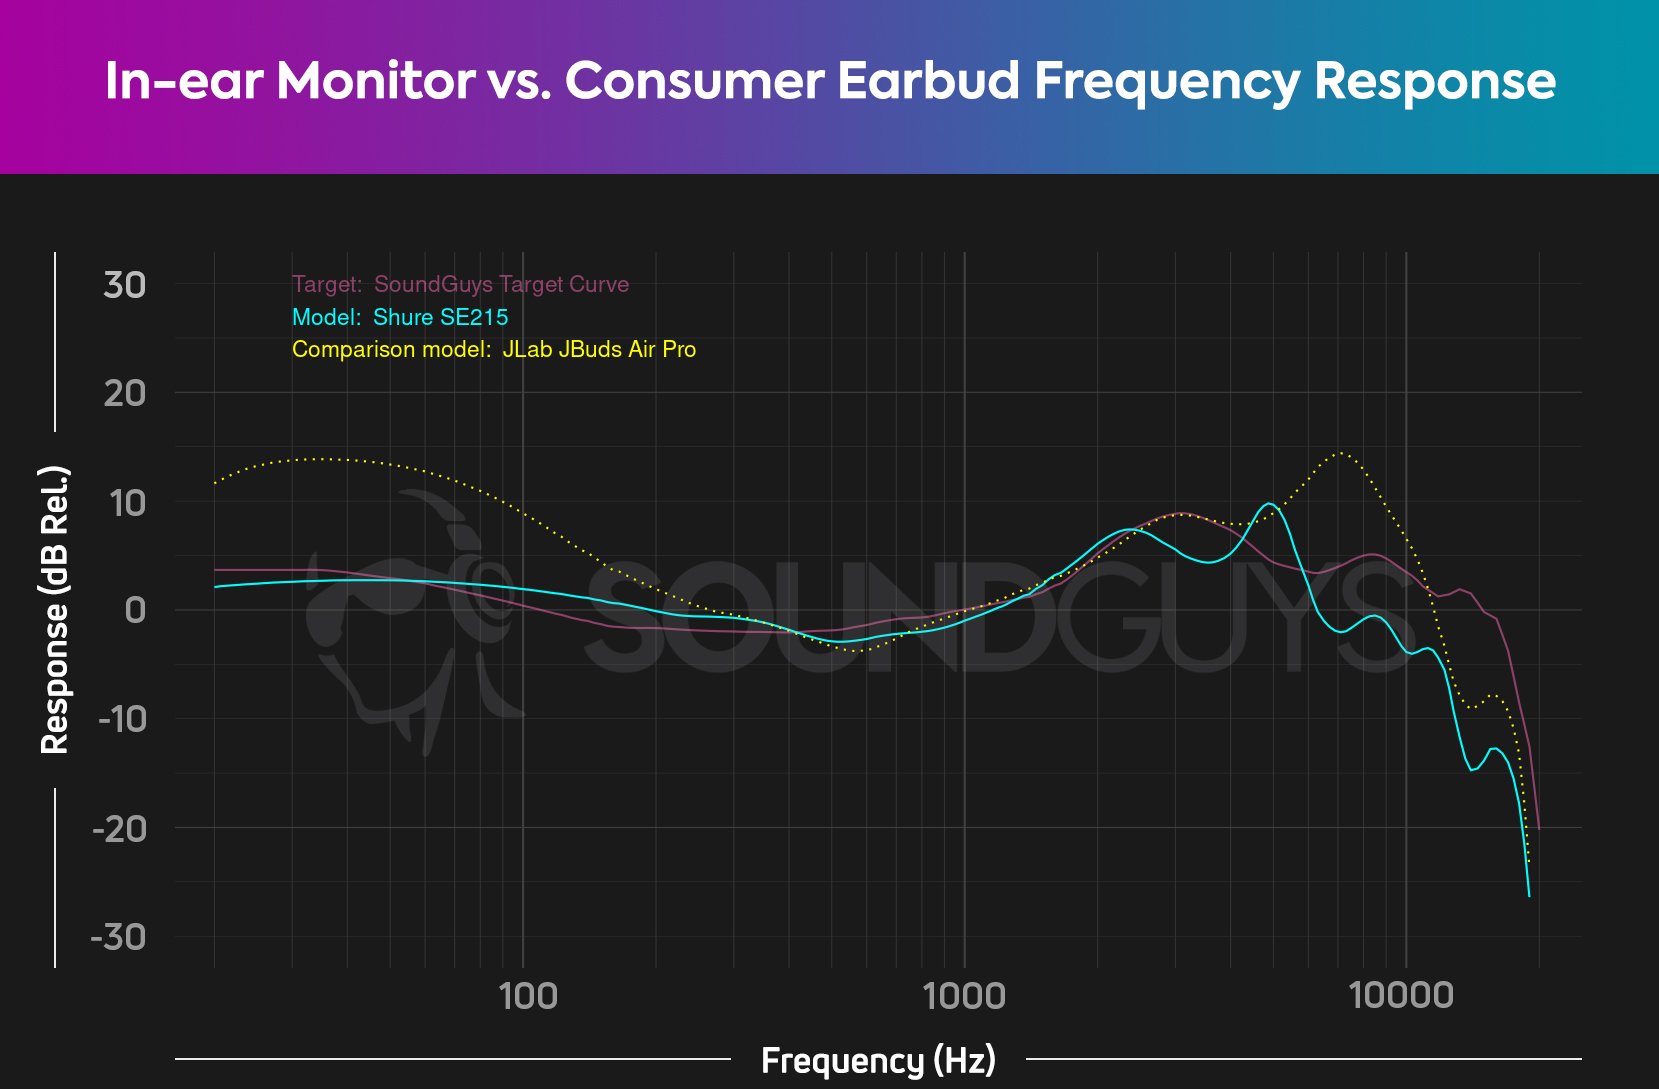 A chart showing the difference in frequency response between the Shure SE215 and the JLab JBuds Air Pro.